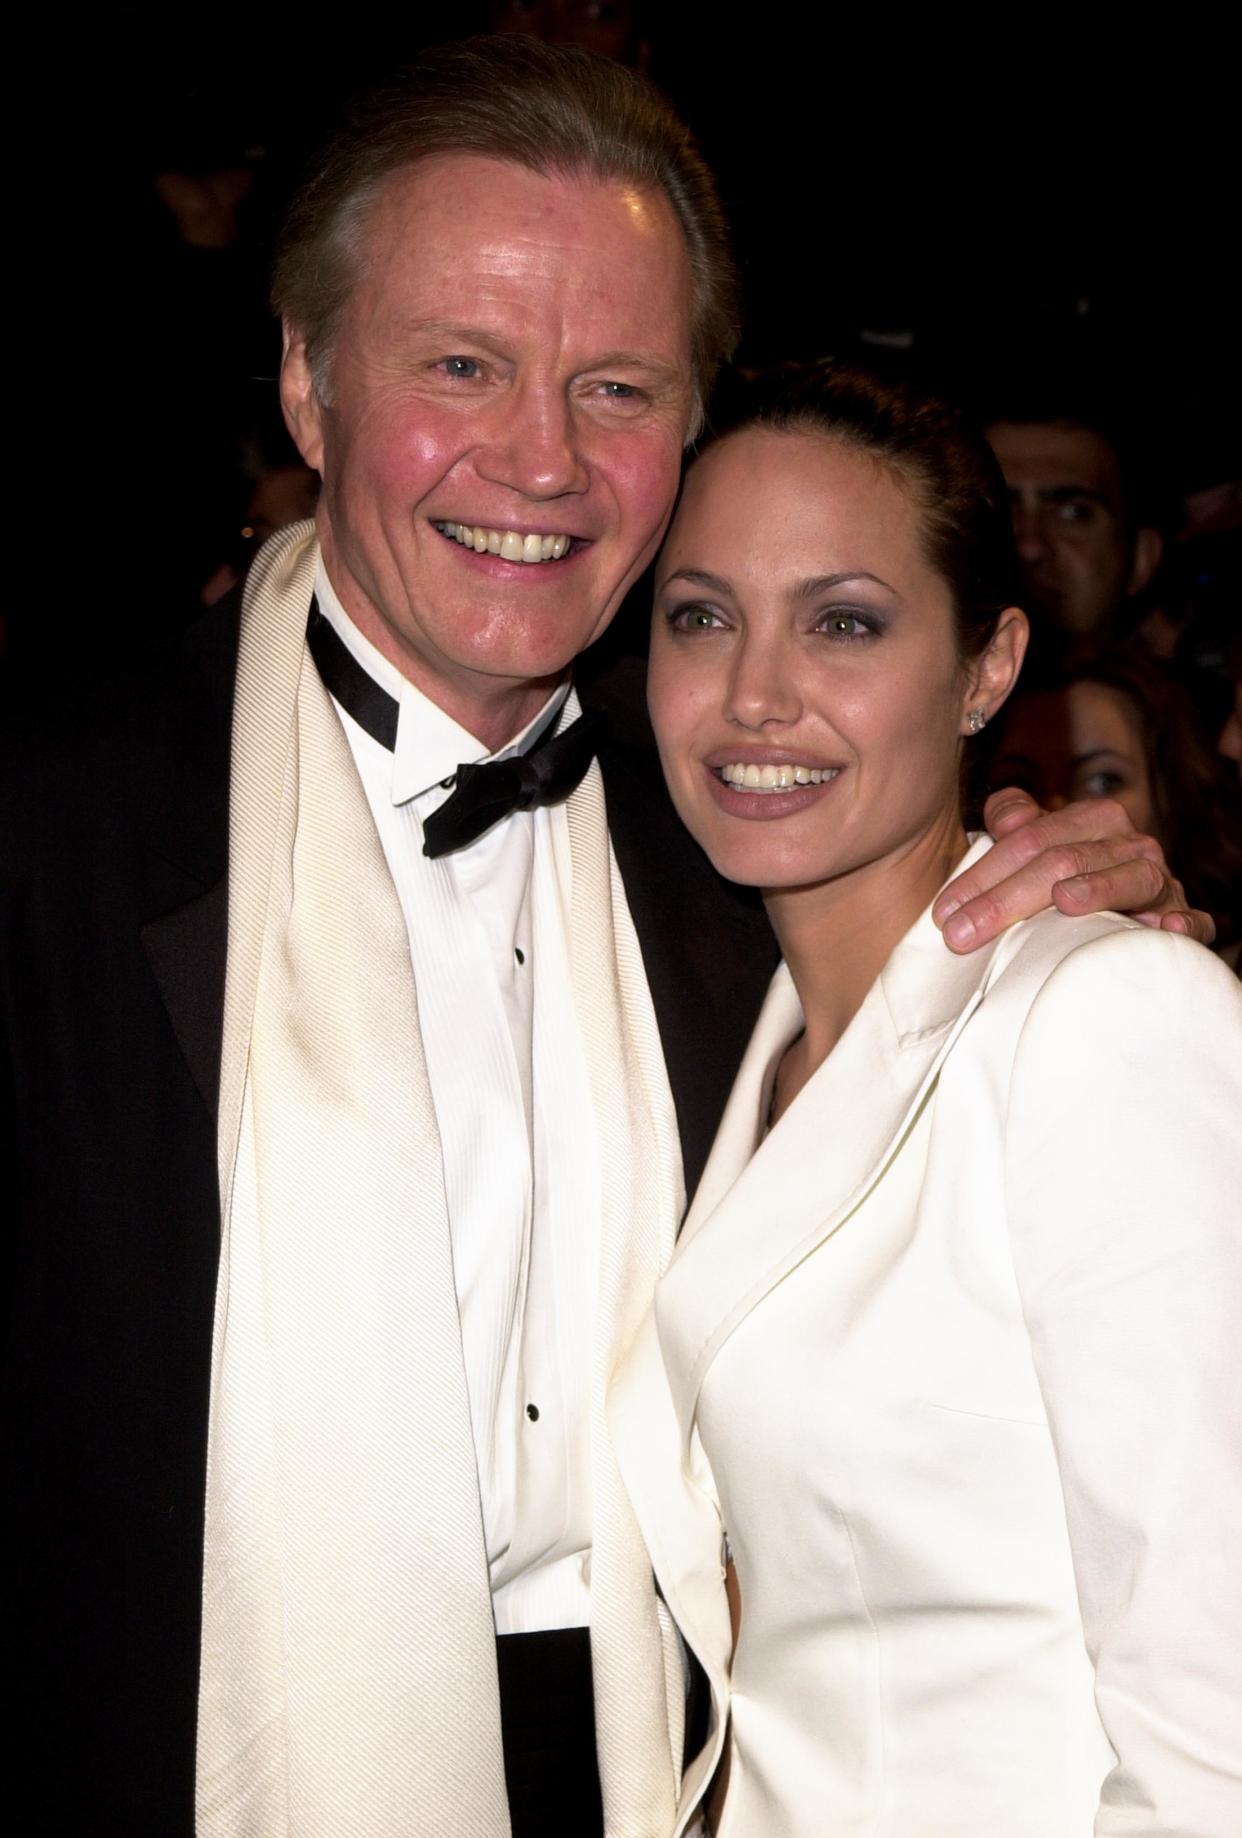 Jon Voight and Angelina Jolie at the Academy Awards in 2001. (Photo: Jeff Vespa/WireImage)